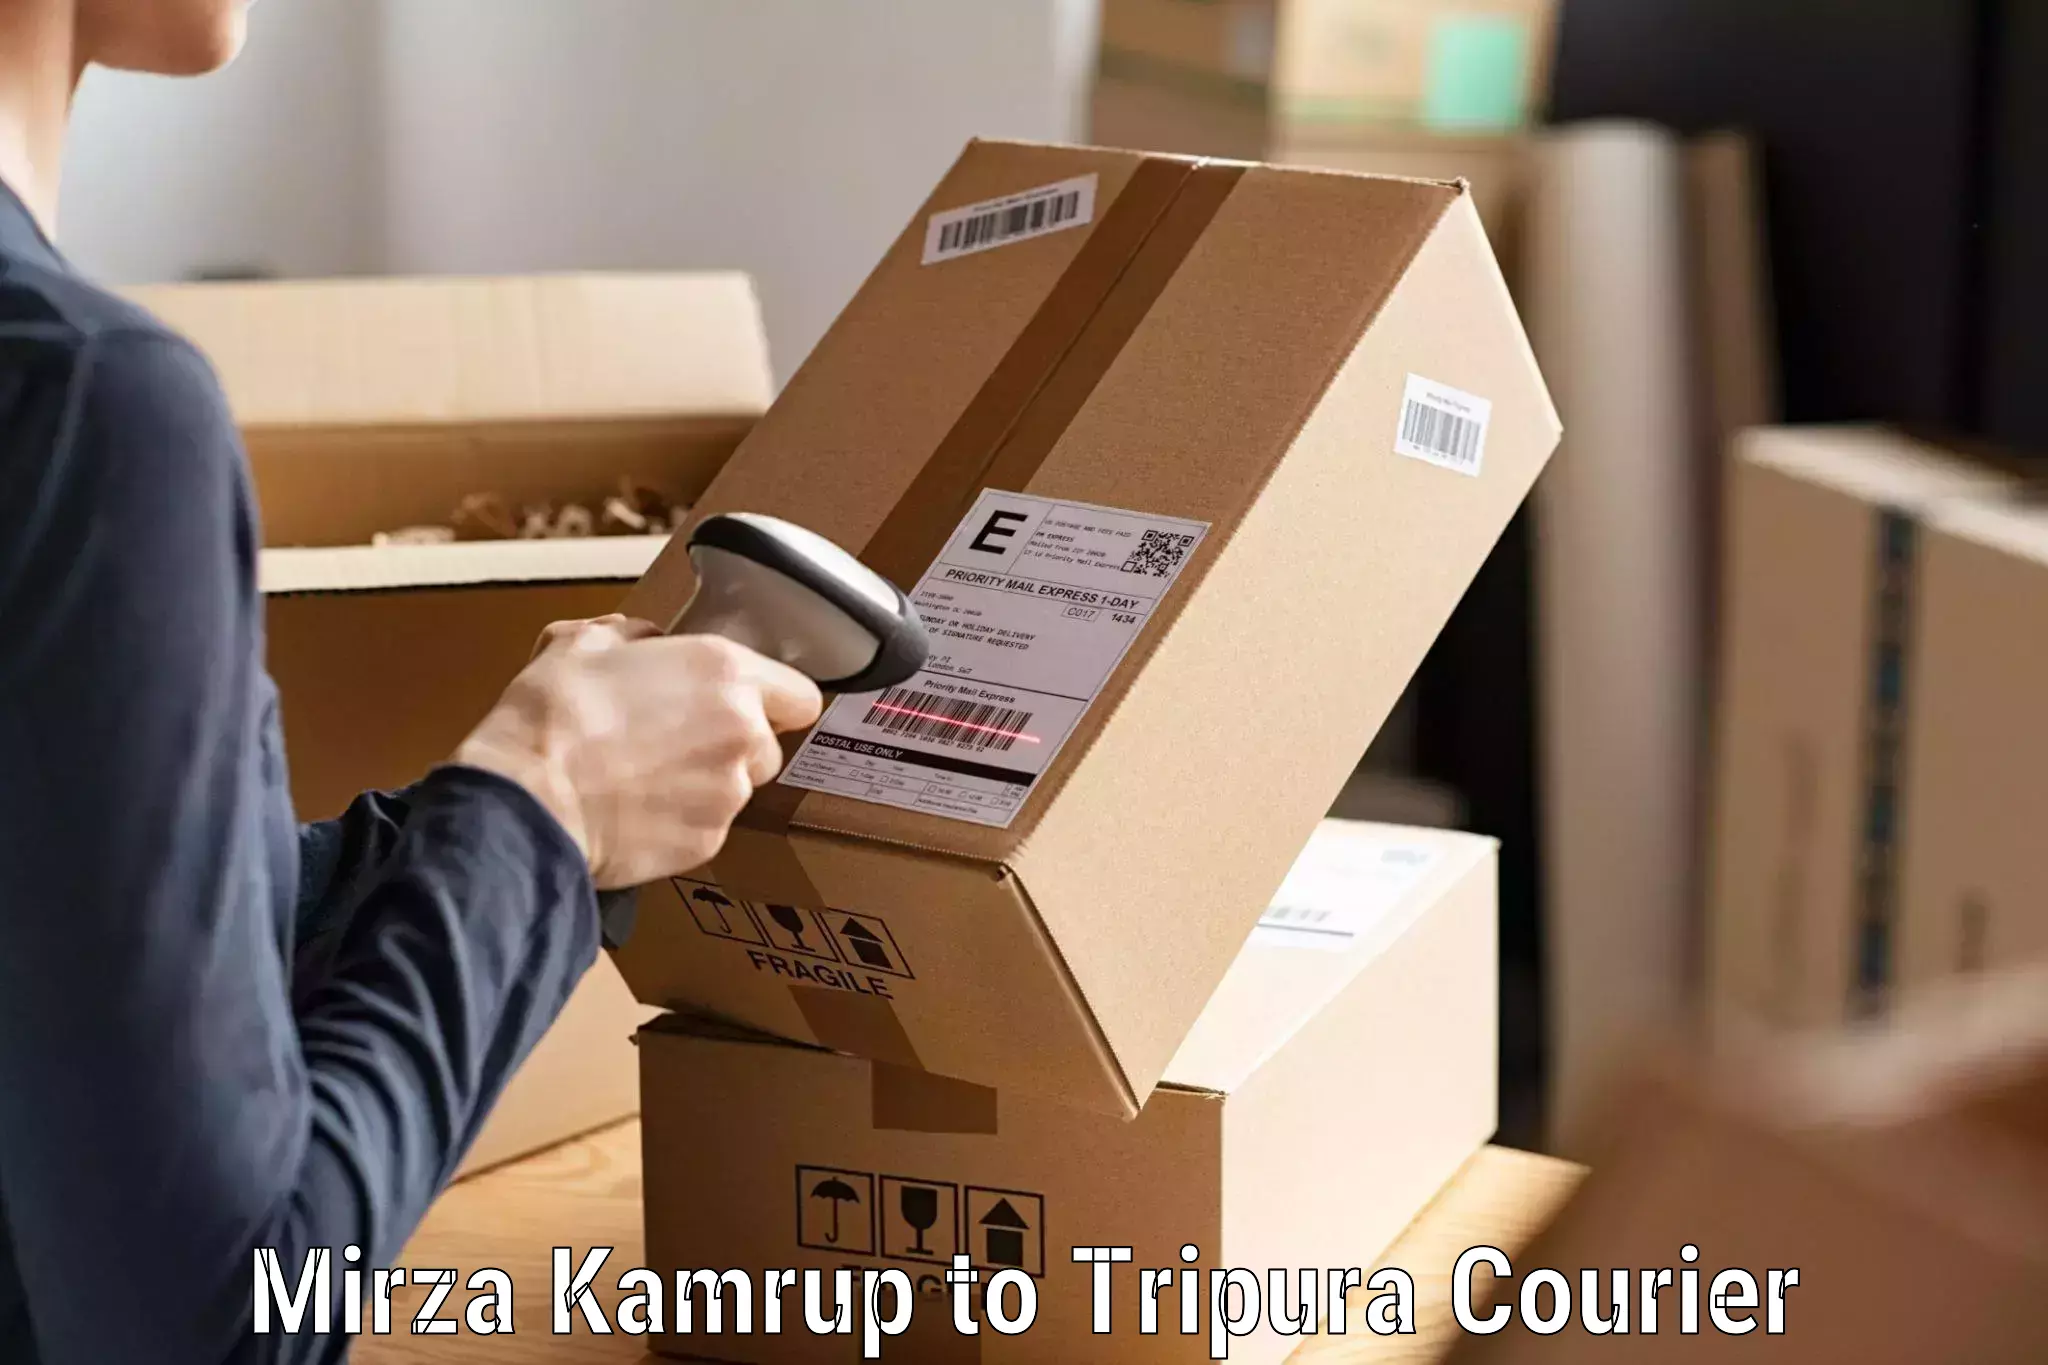 Parcel service for businesses Mirza Kamrup to Udaipur Tripura